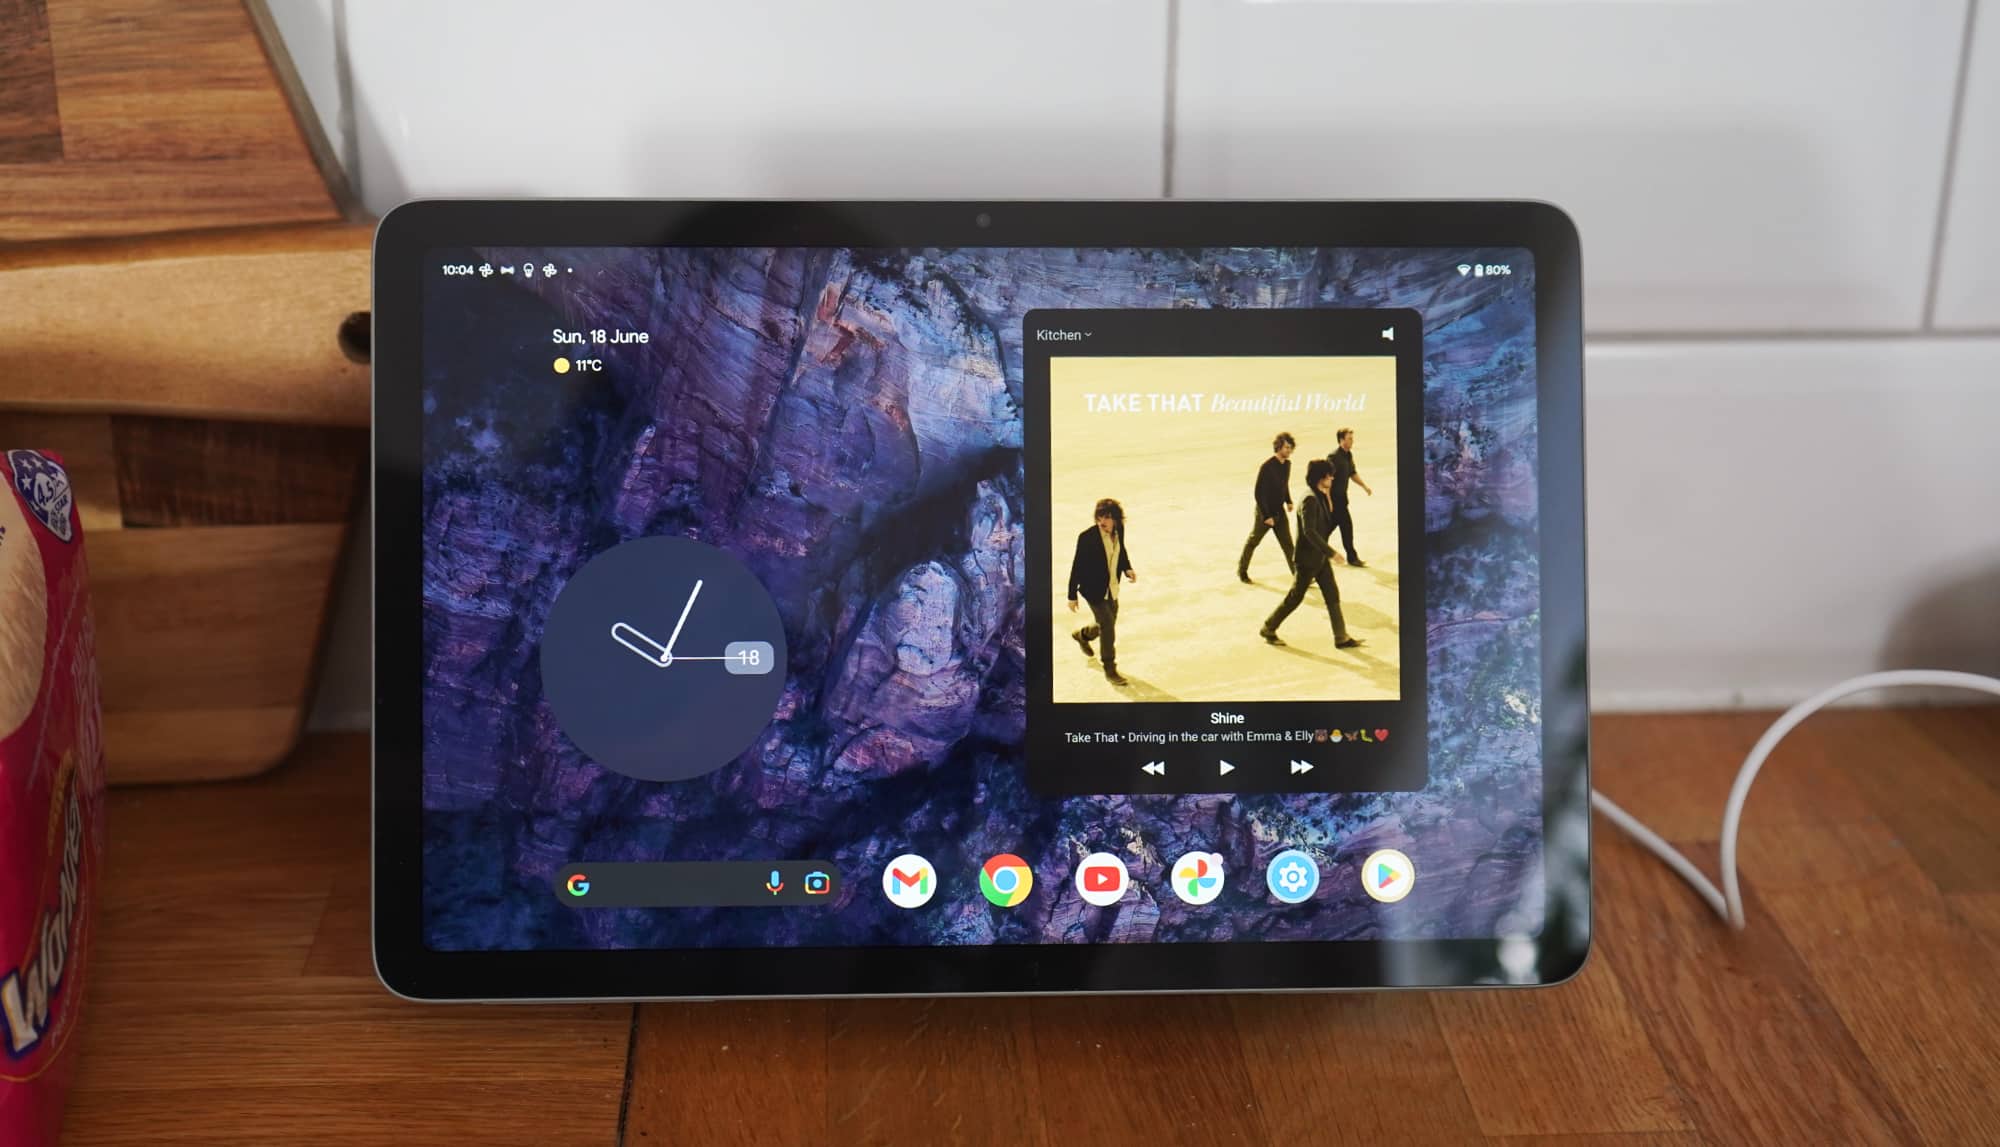 Google Pixel Tablet: Review - Reviewed